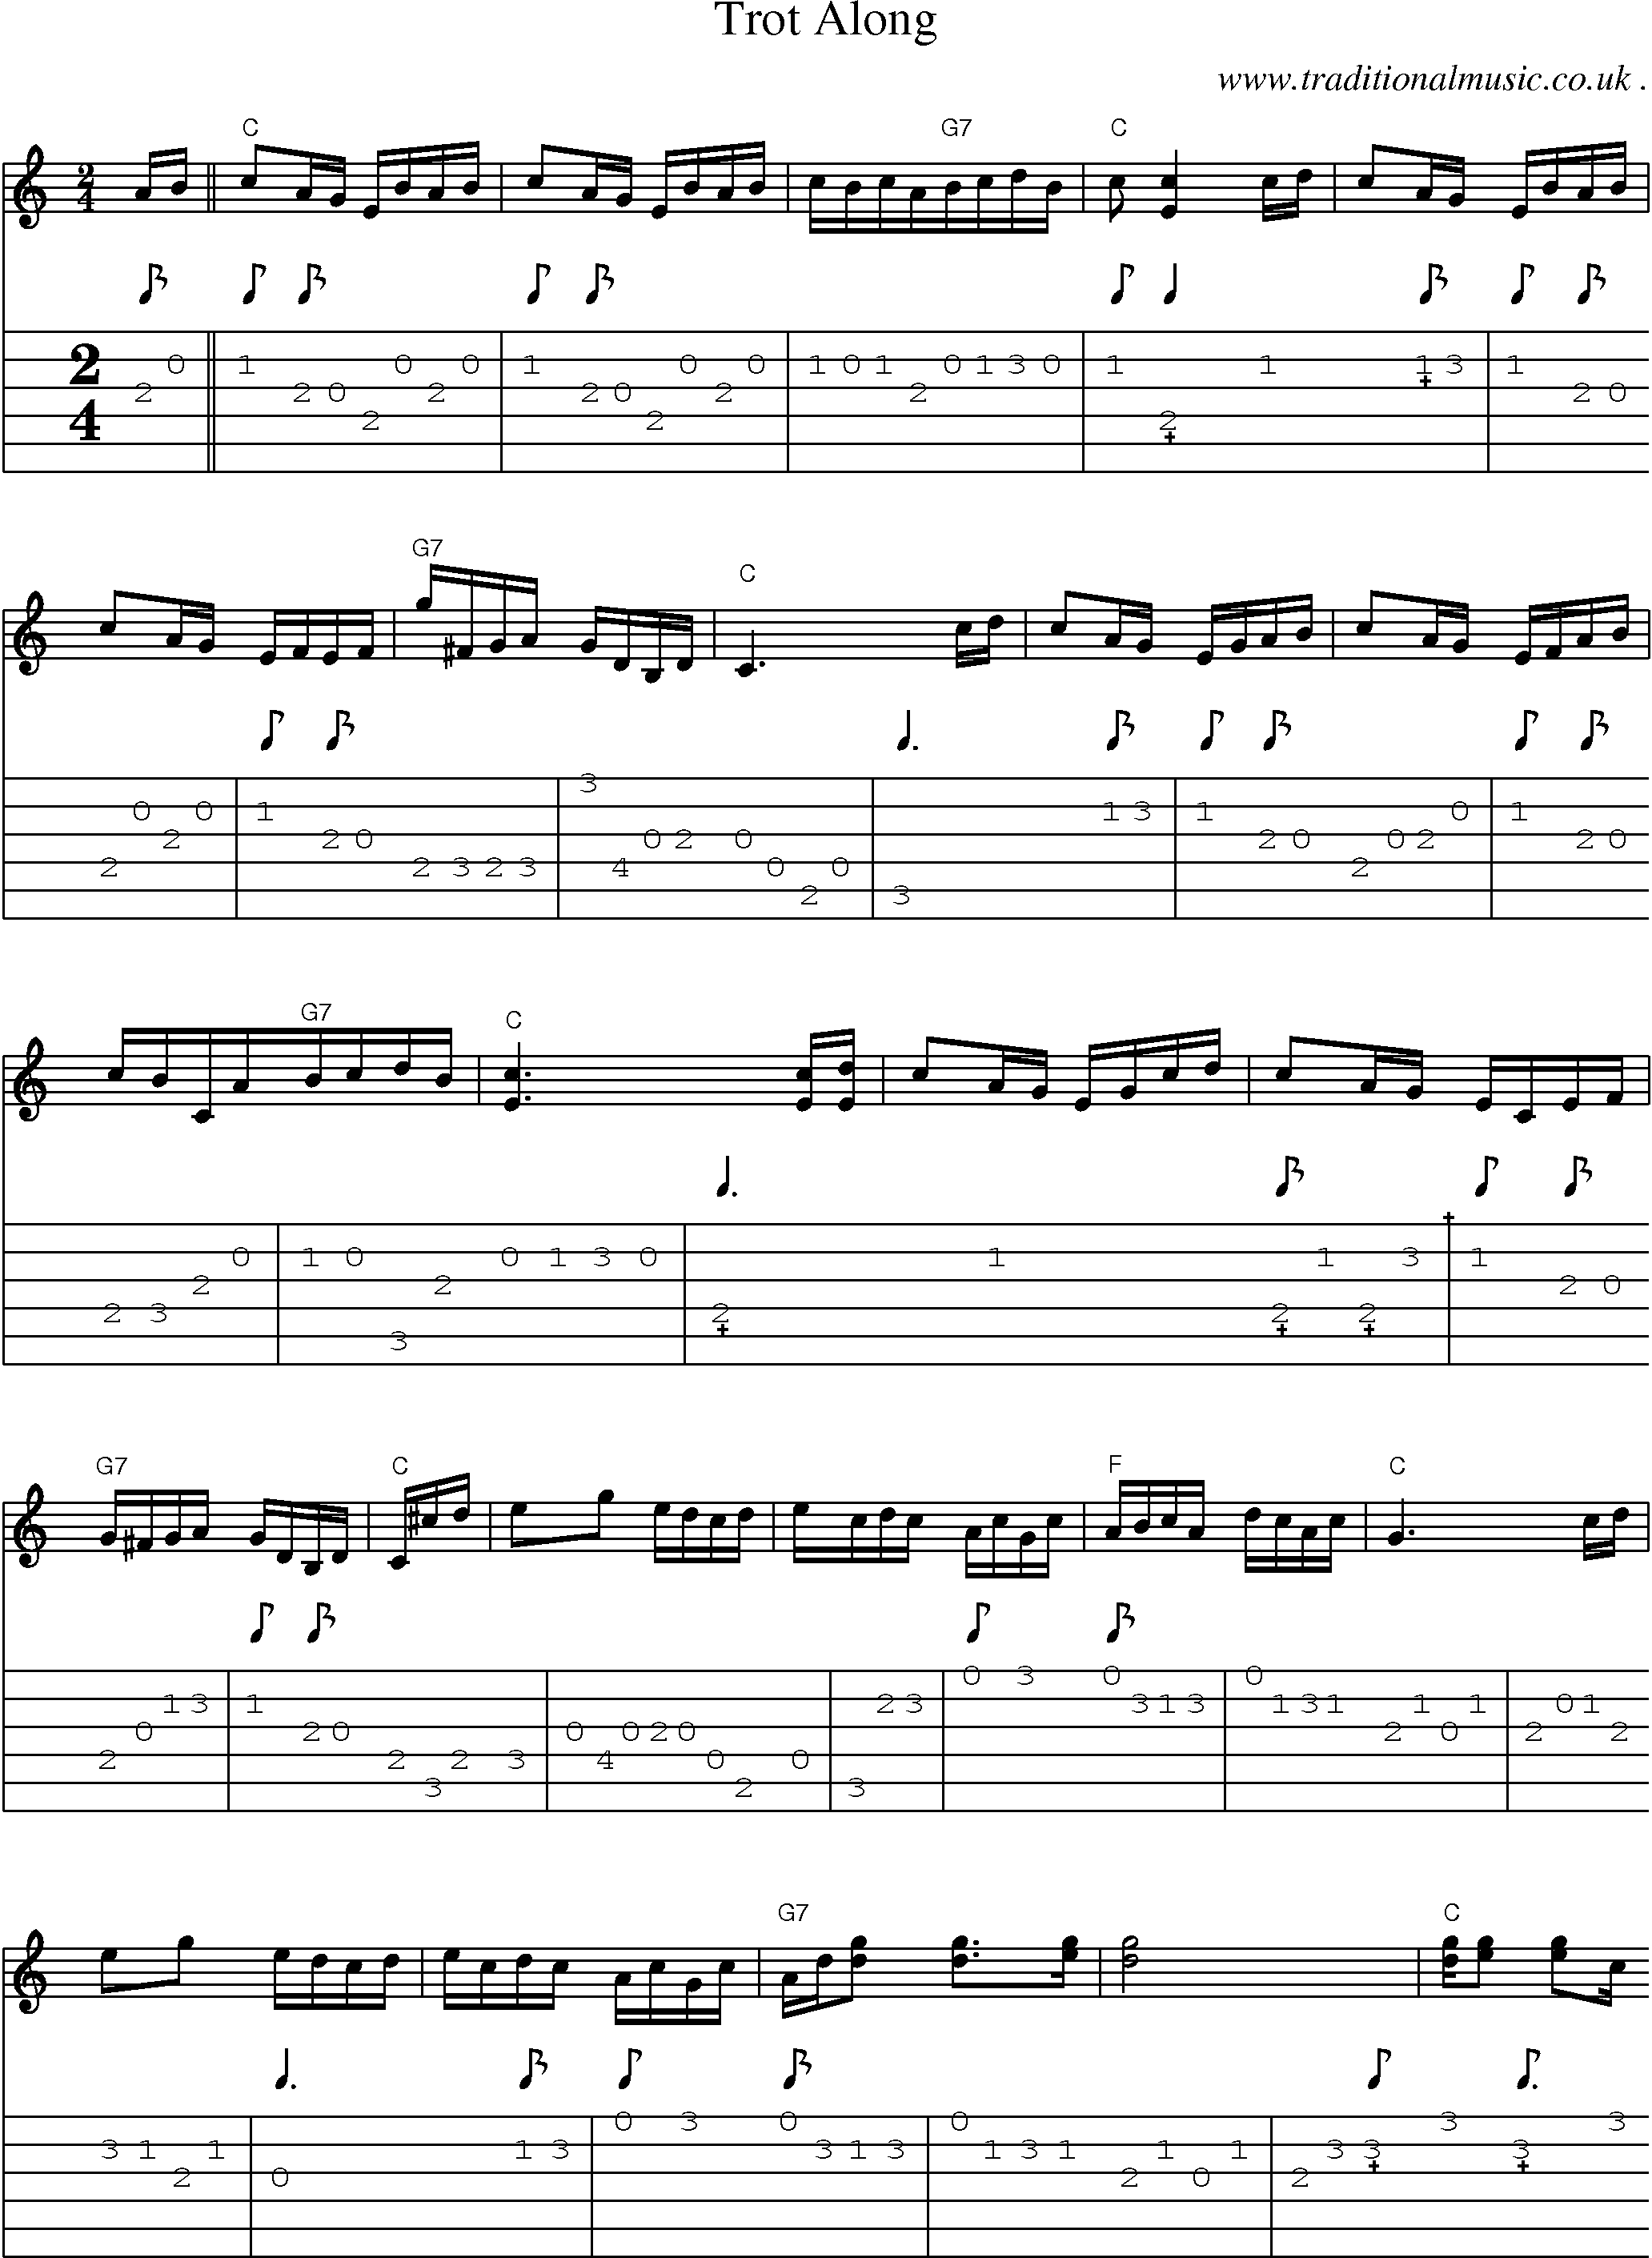 Sheet-Music and Guitar Tabs for Trot Along